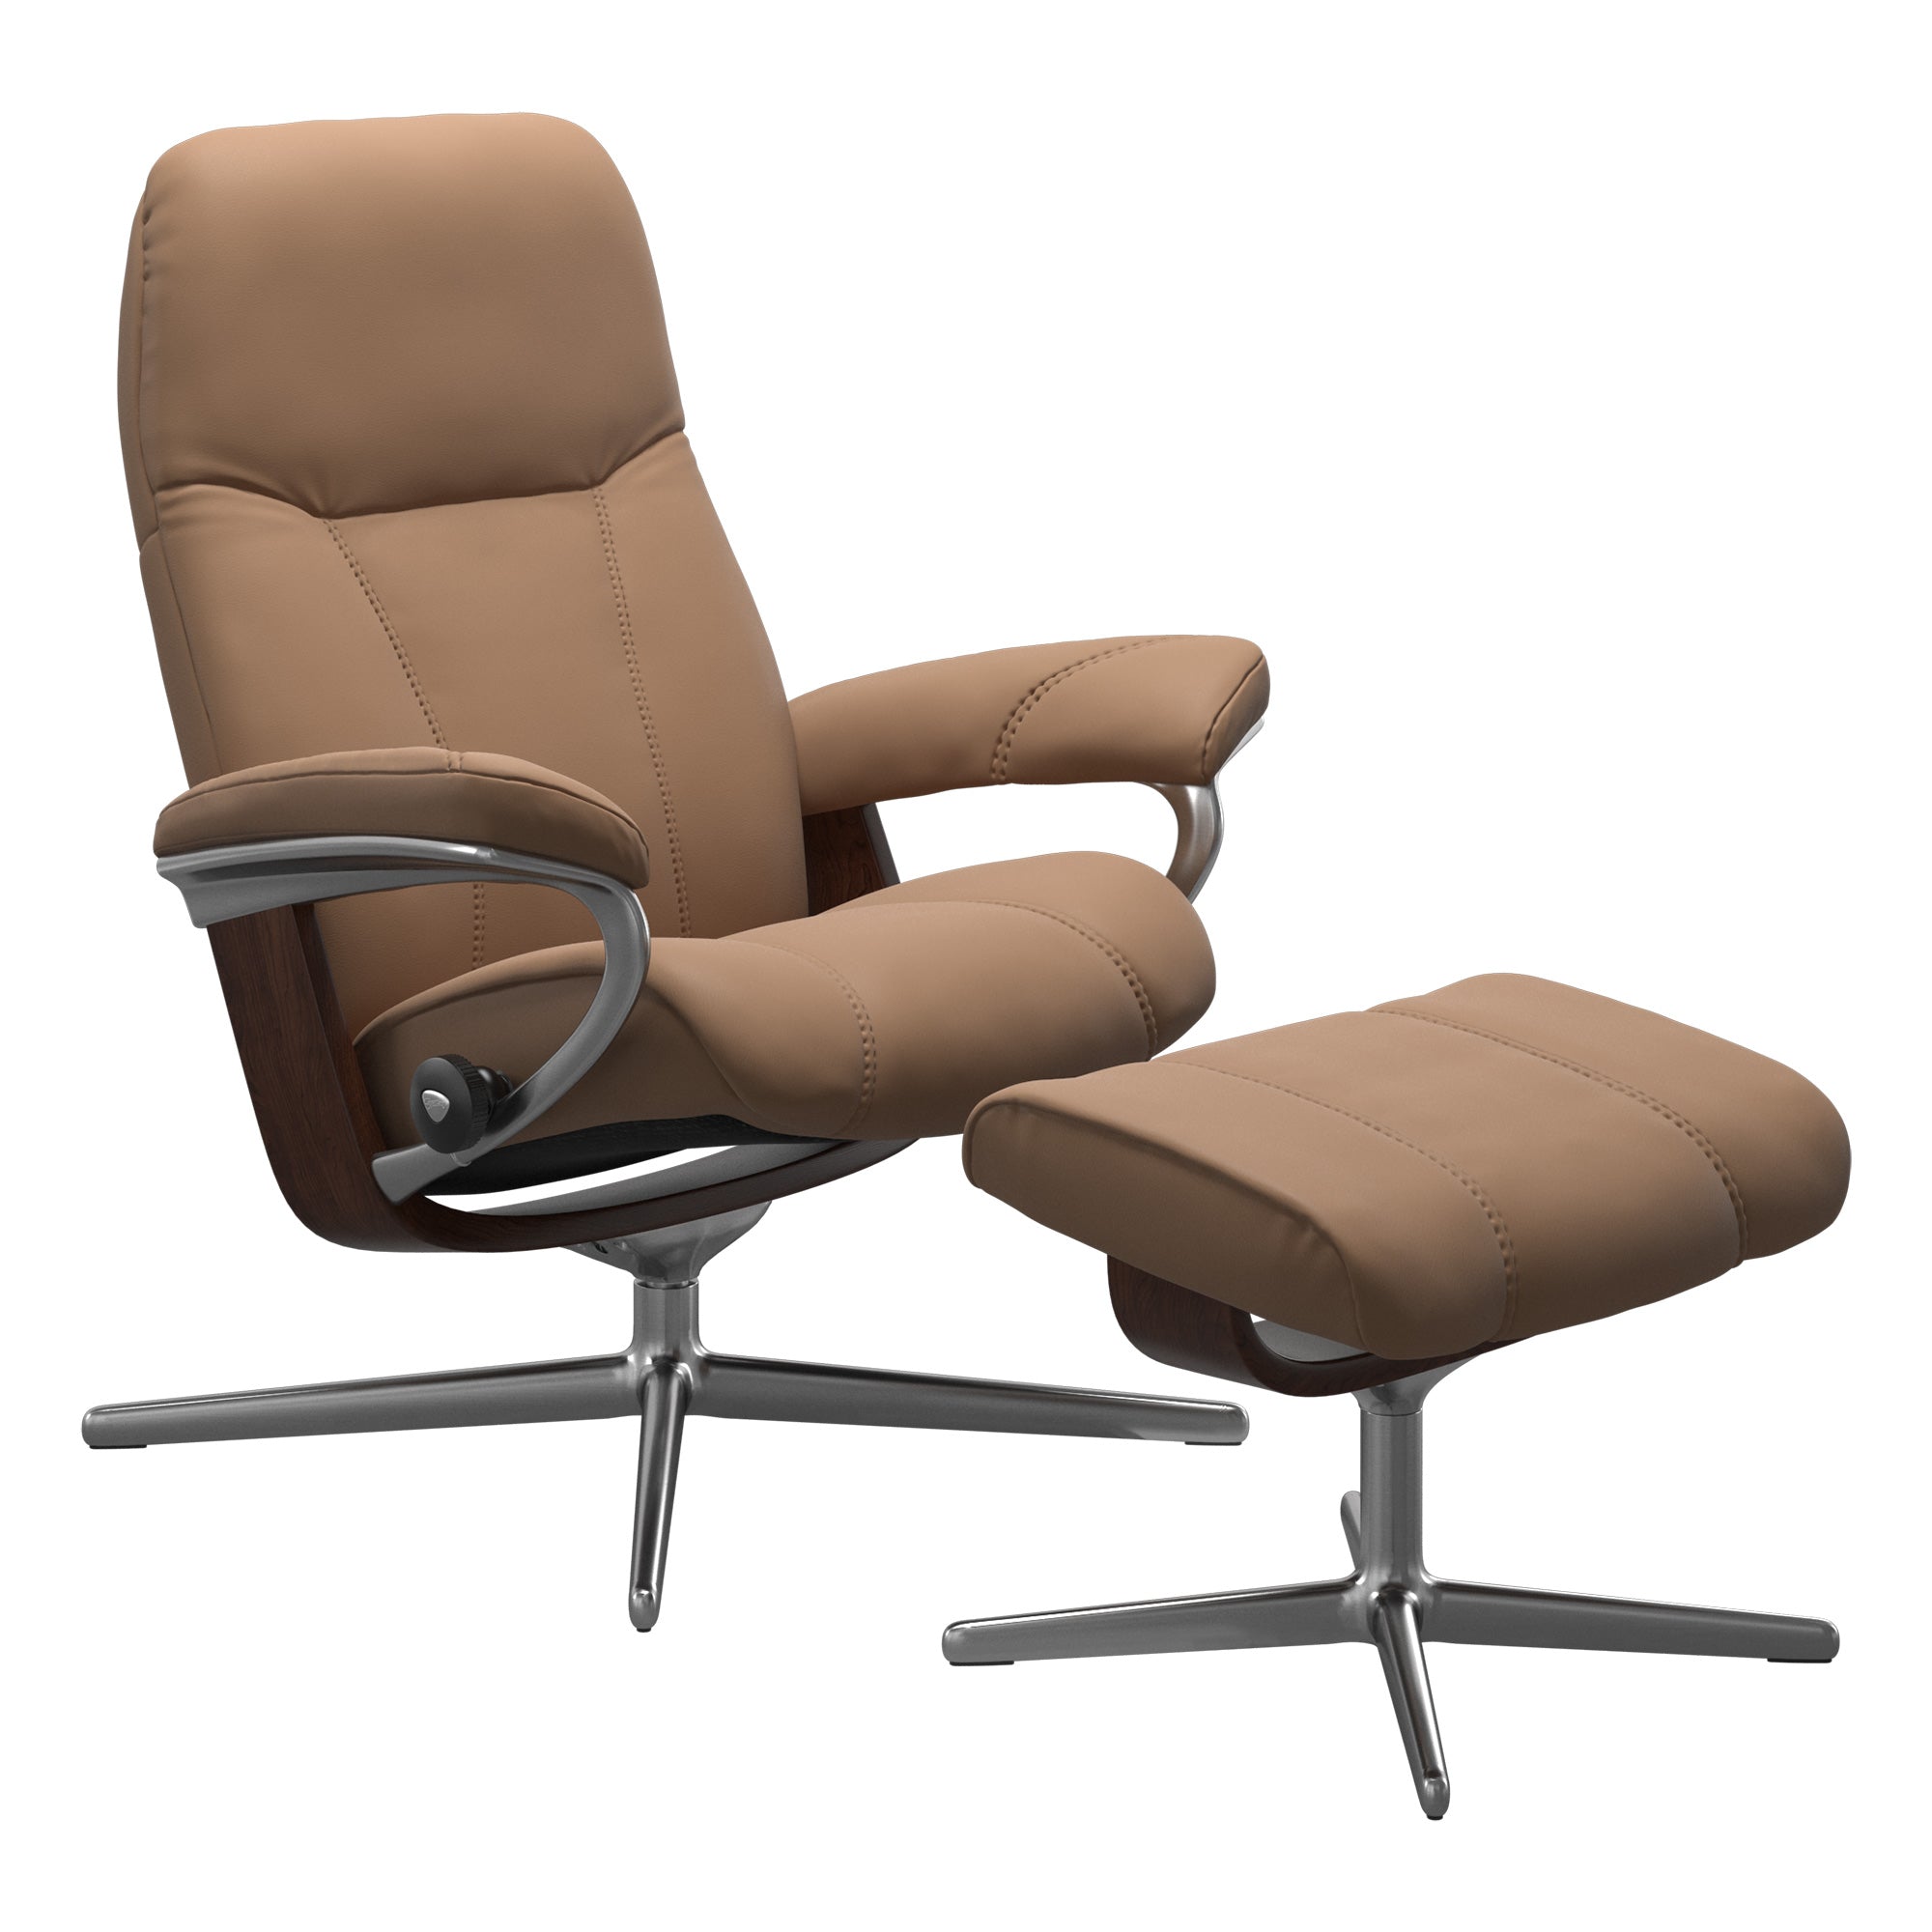 Stressless Consul Executive Office Desk Chair Recliner in Batick Cream  Leather by Ekornes